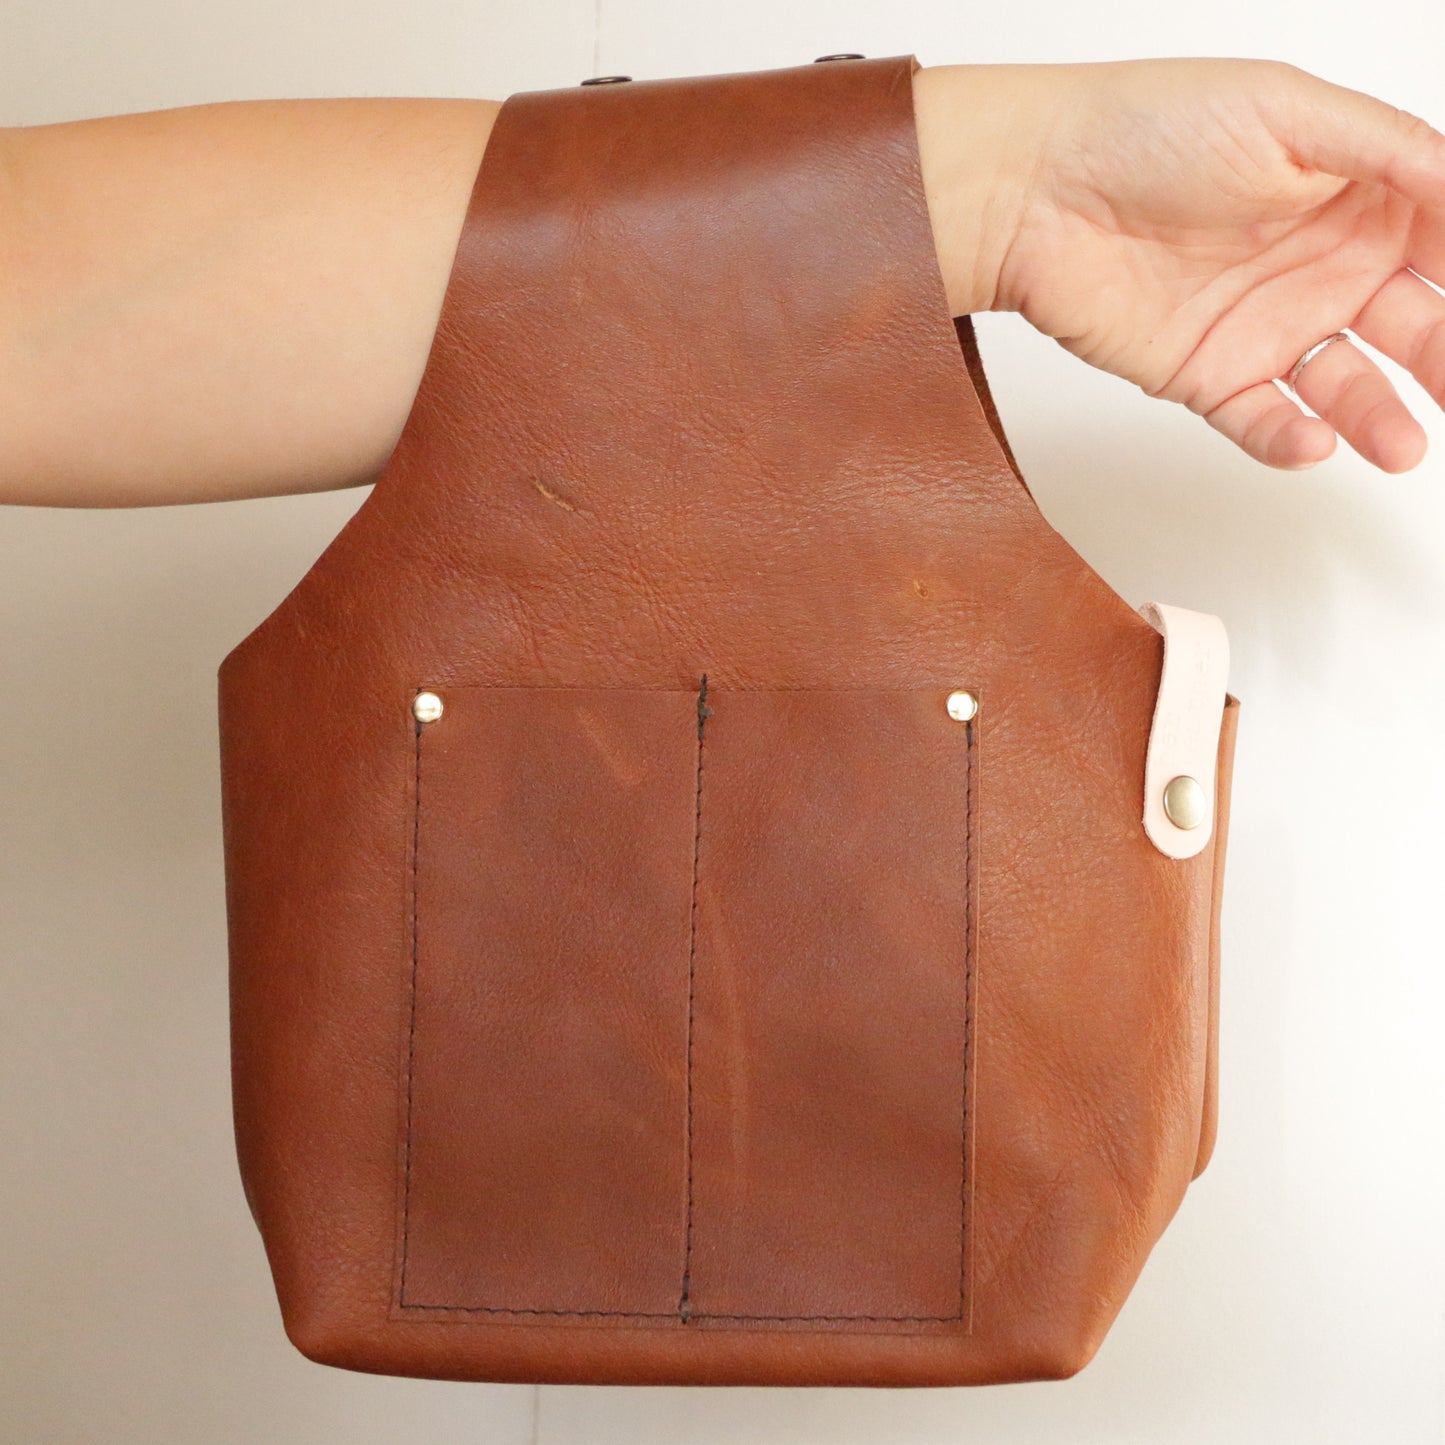 Arm Sling Bags - Her Leather Co.